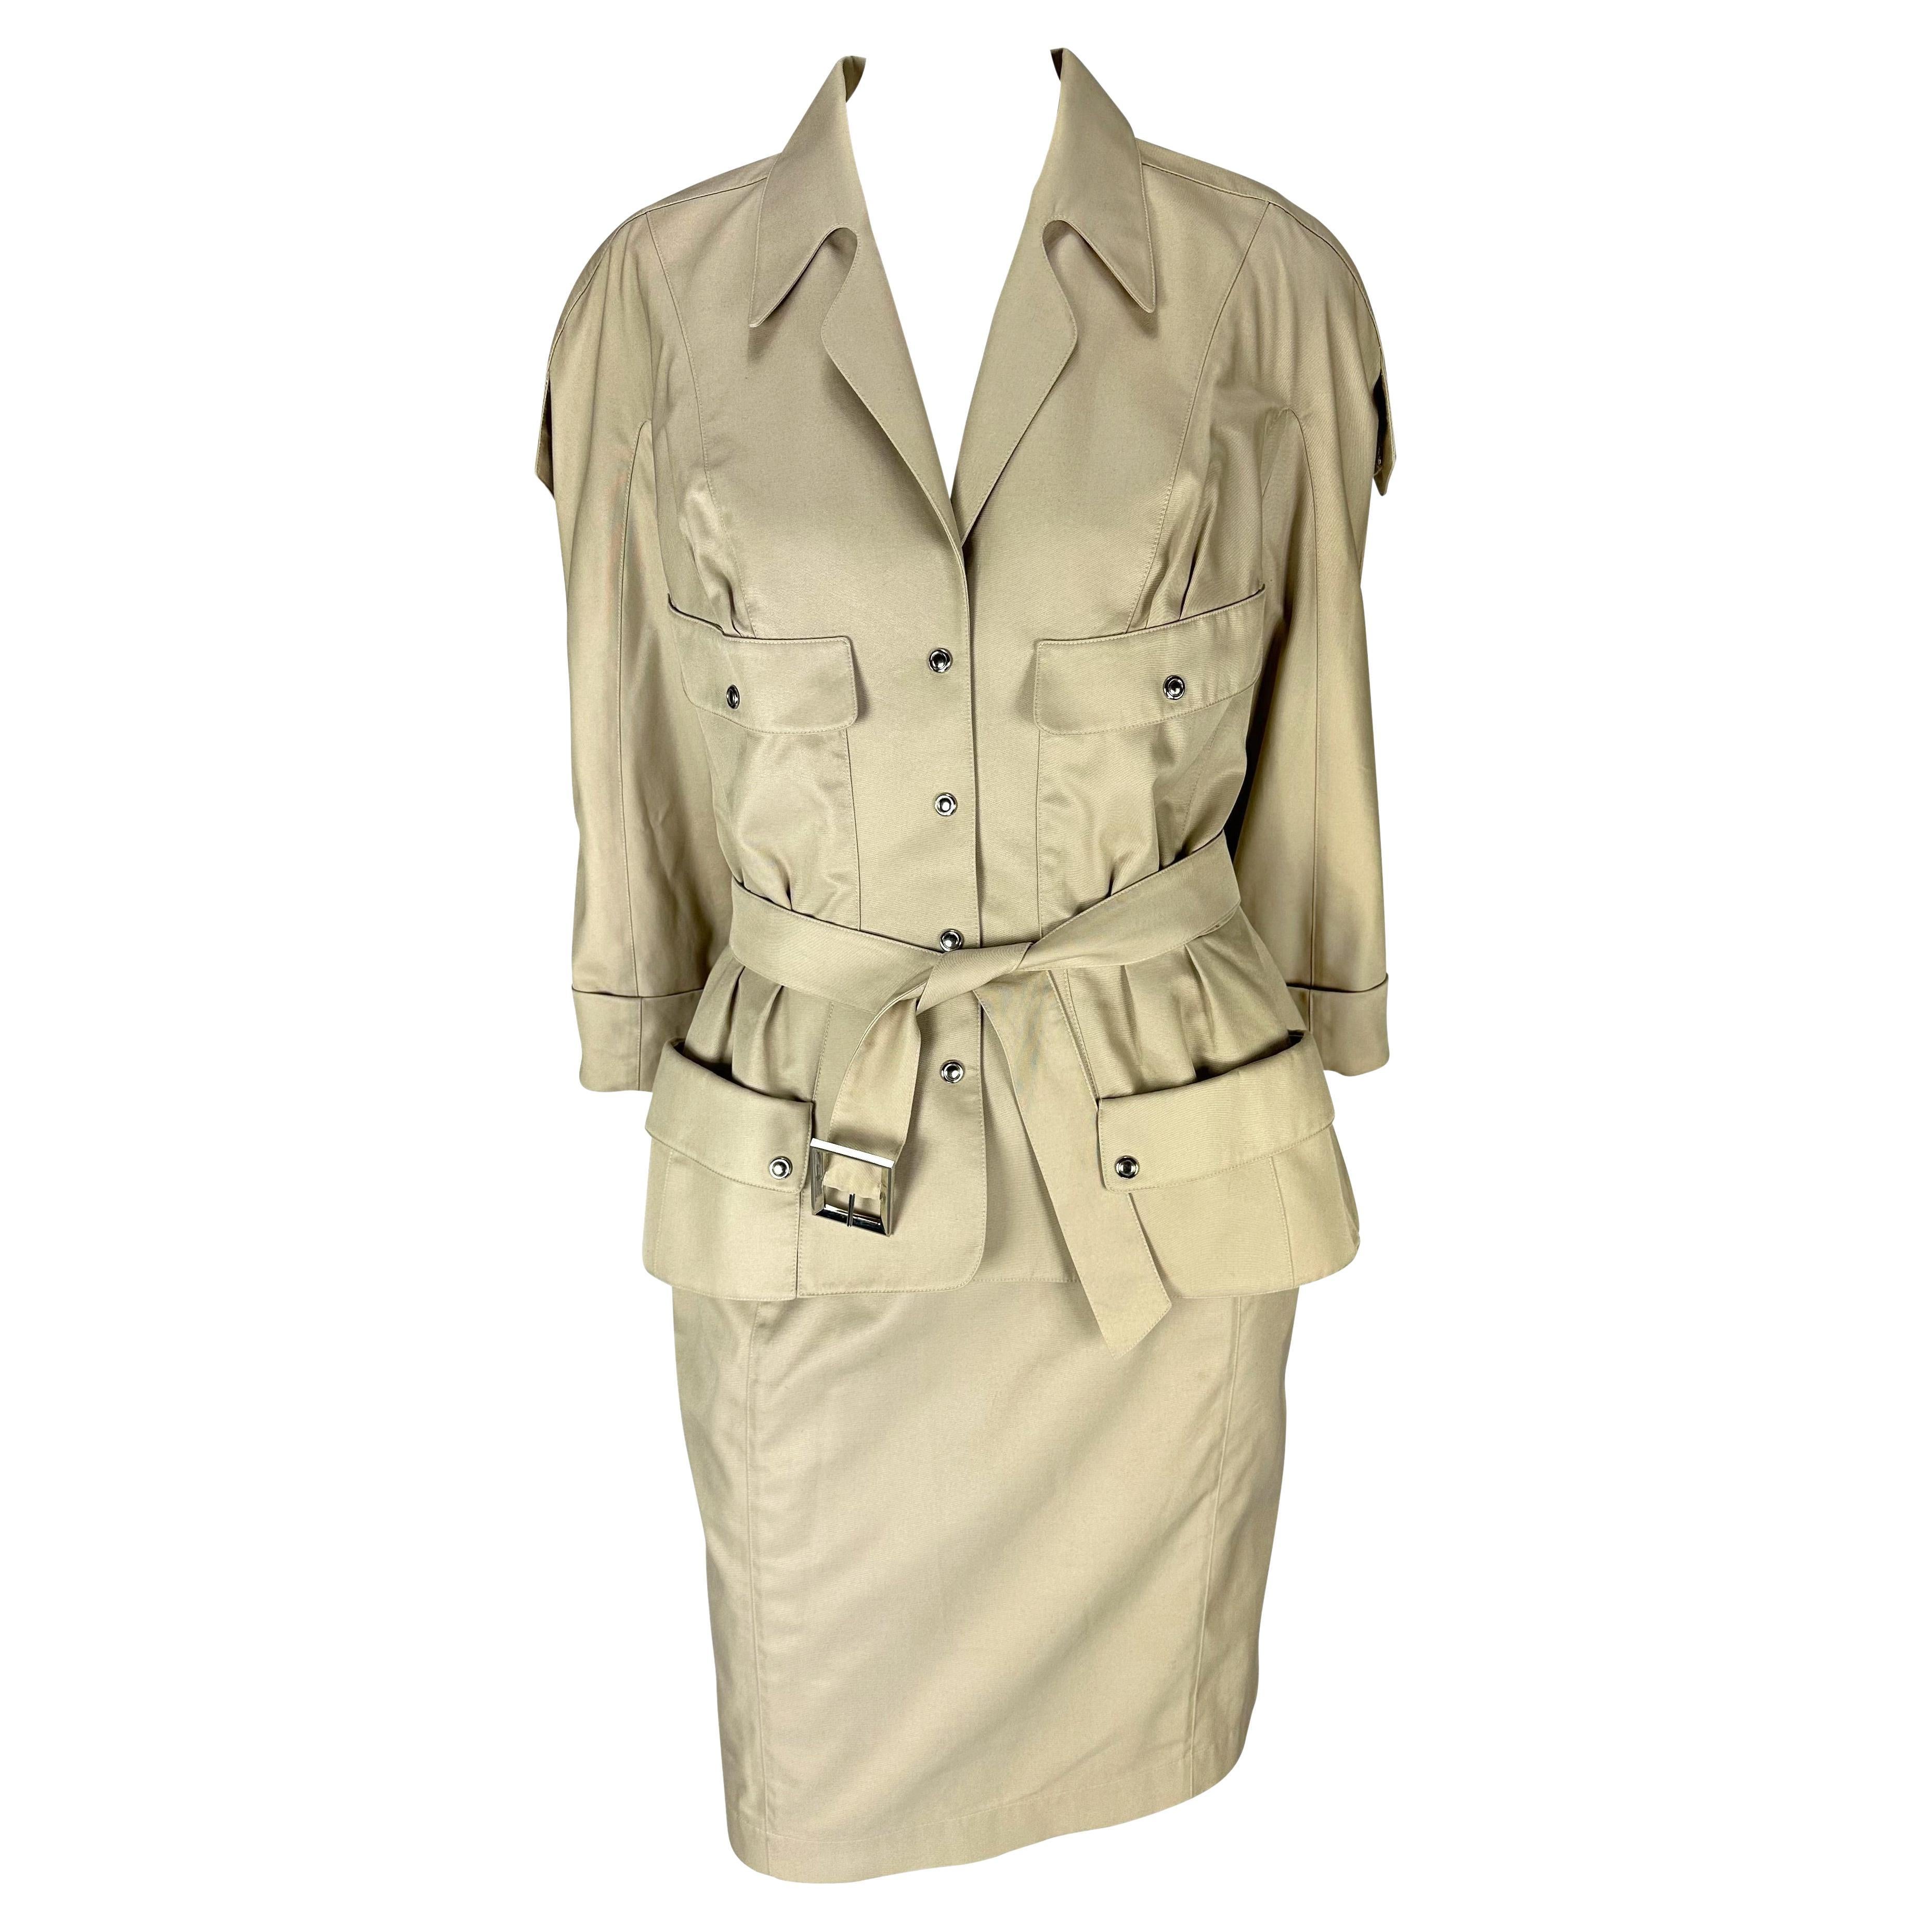 S/S 1996 Thierry Mugler Runway Khaki Cinched Belted Skirt Suit For Sale